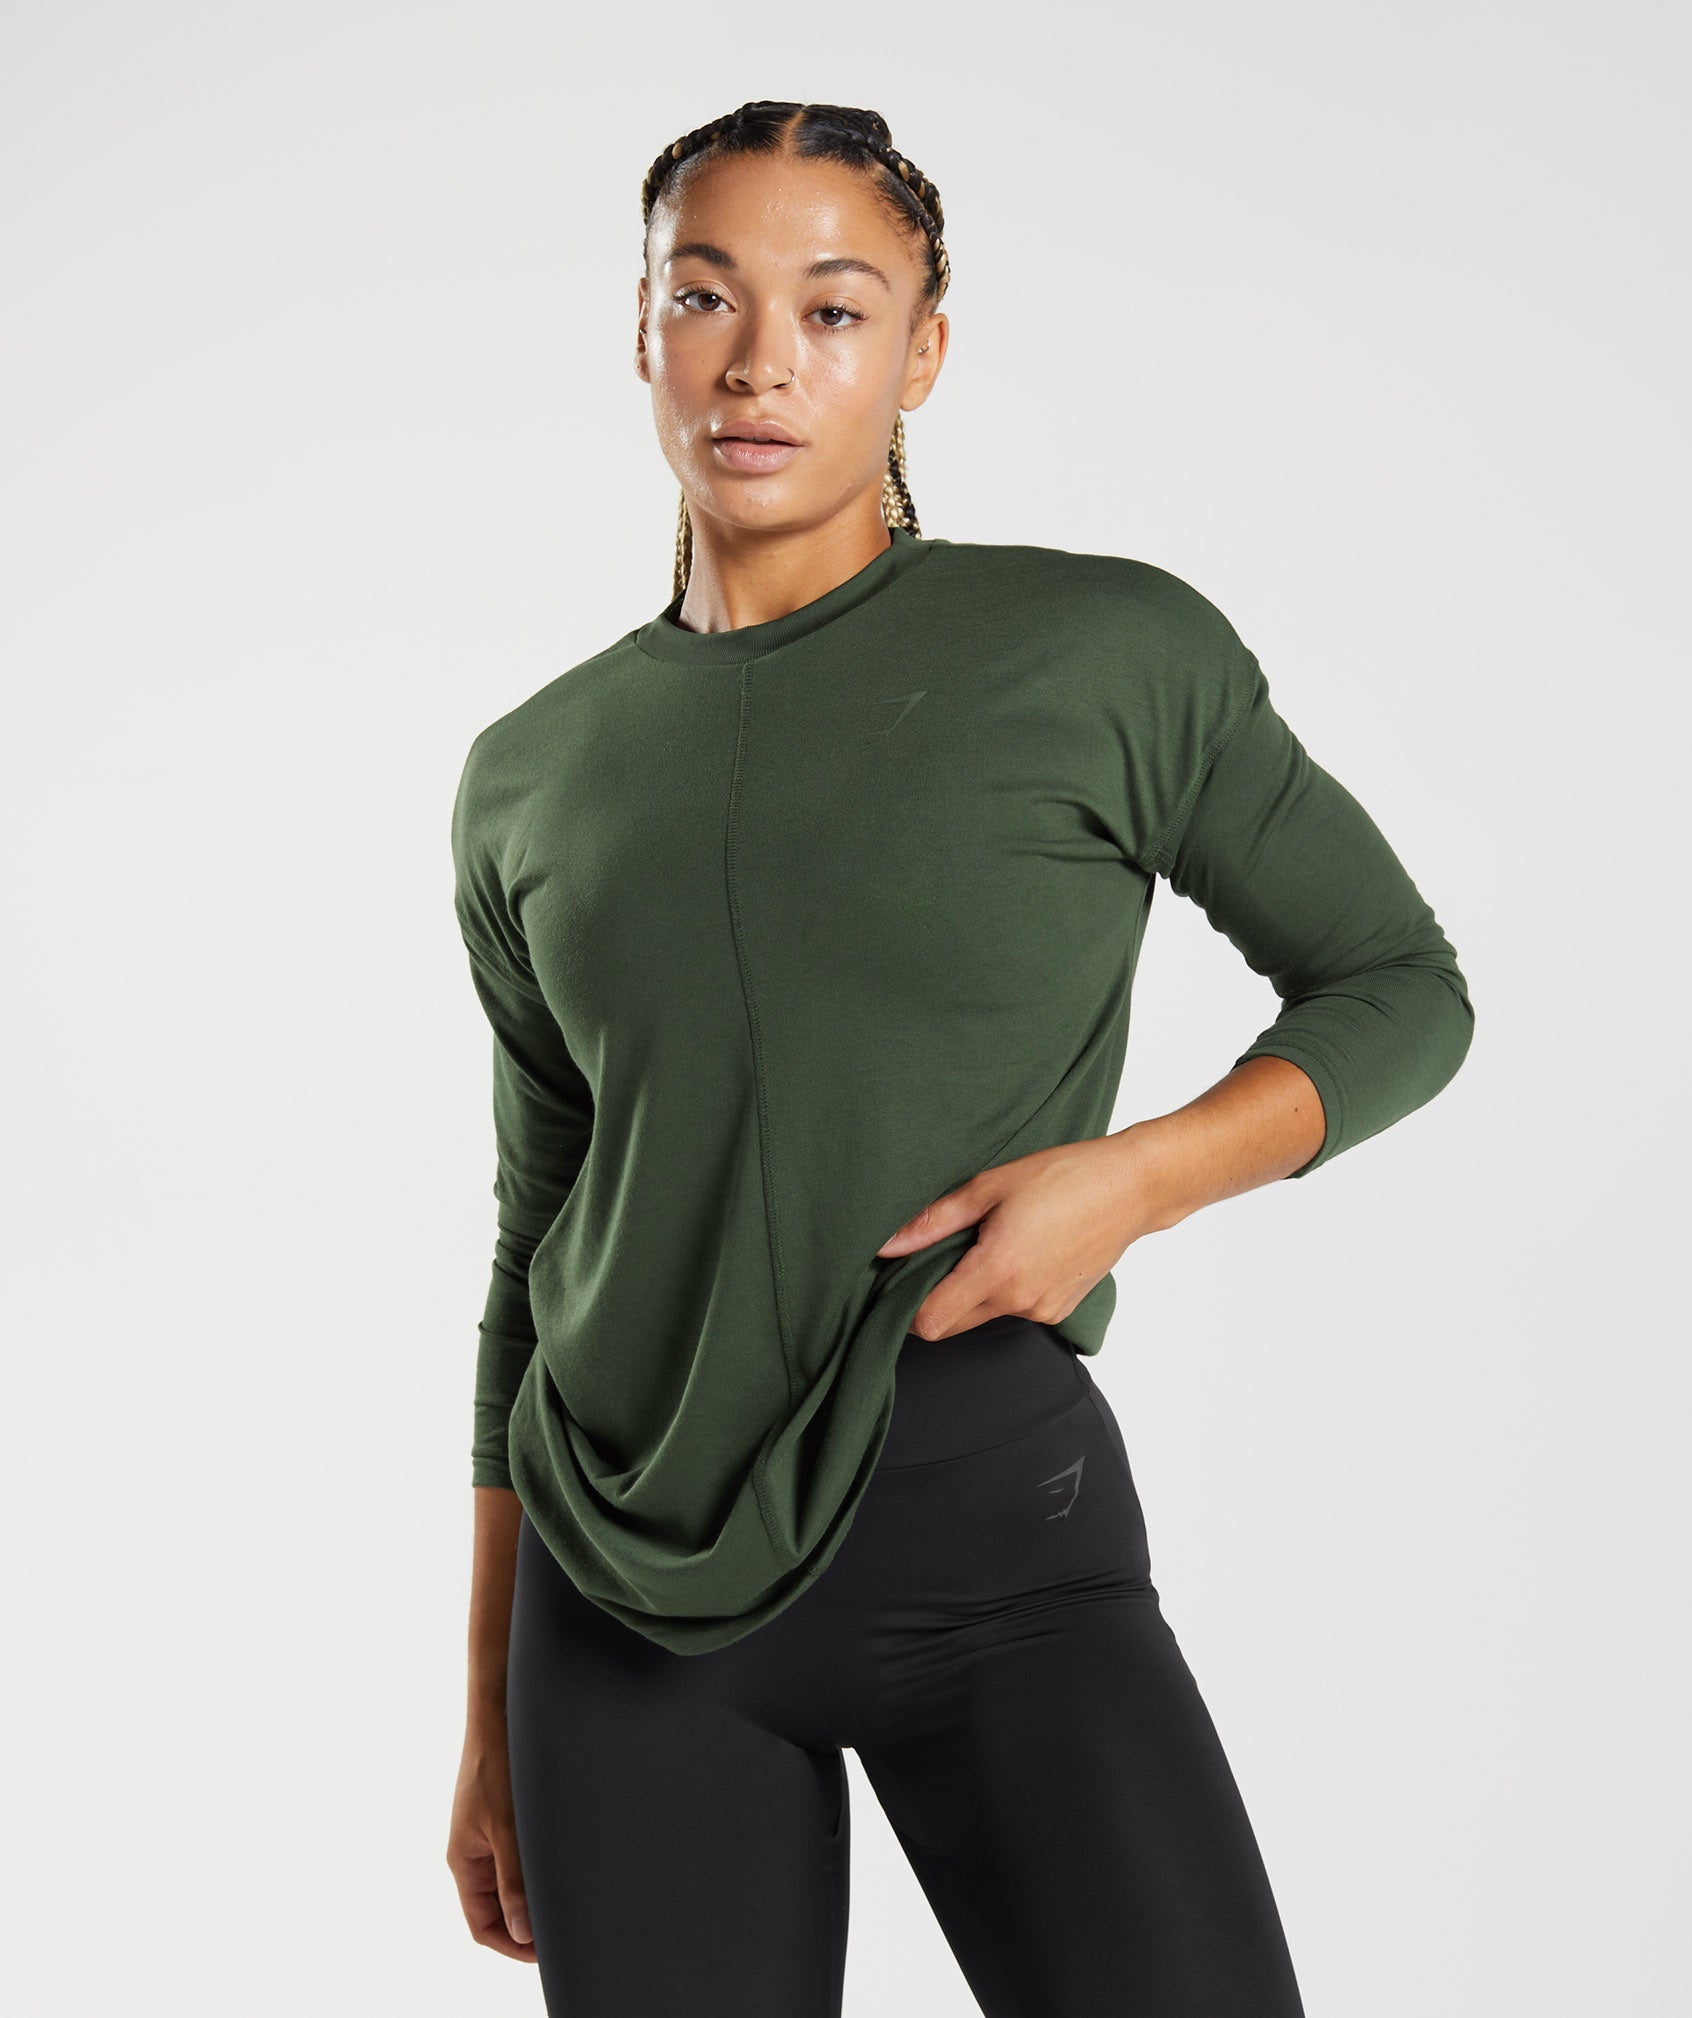 GS Power Long Sleeve T-Shirt in Moss Olive